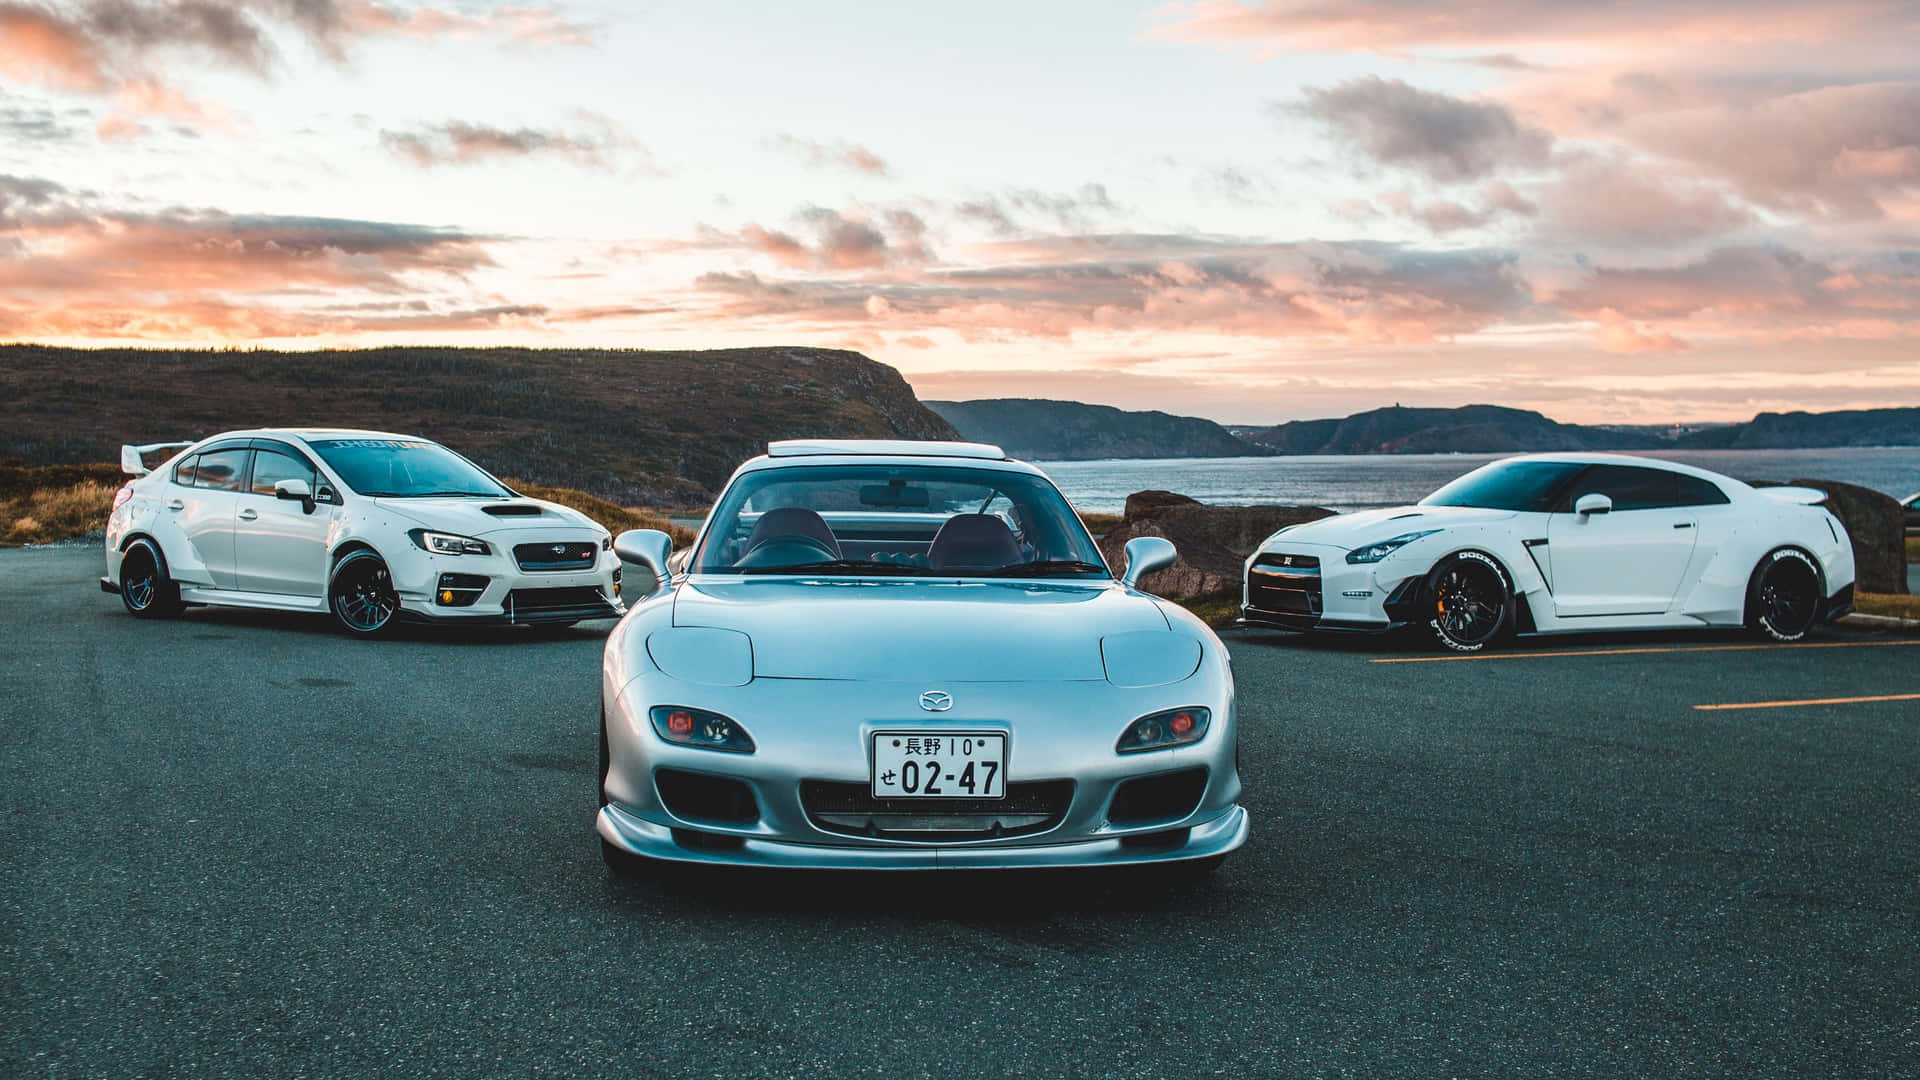 Mazda Rx 7 With Ocean View Landscape